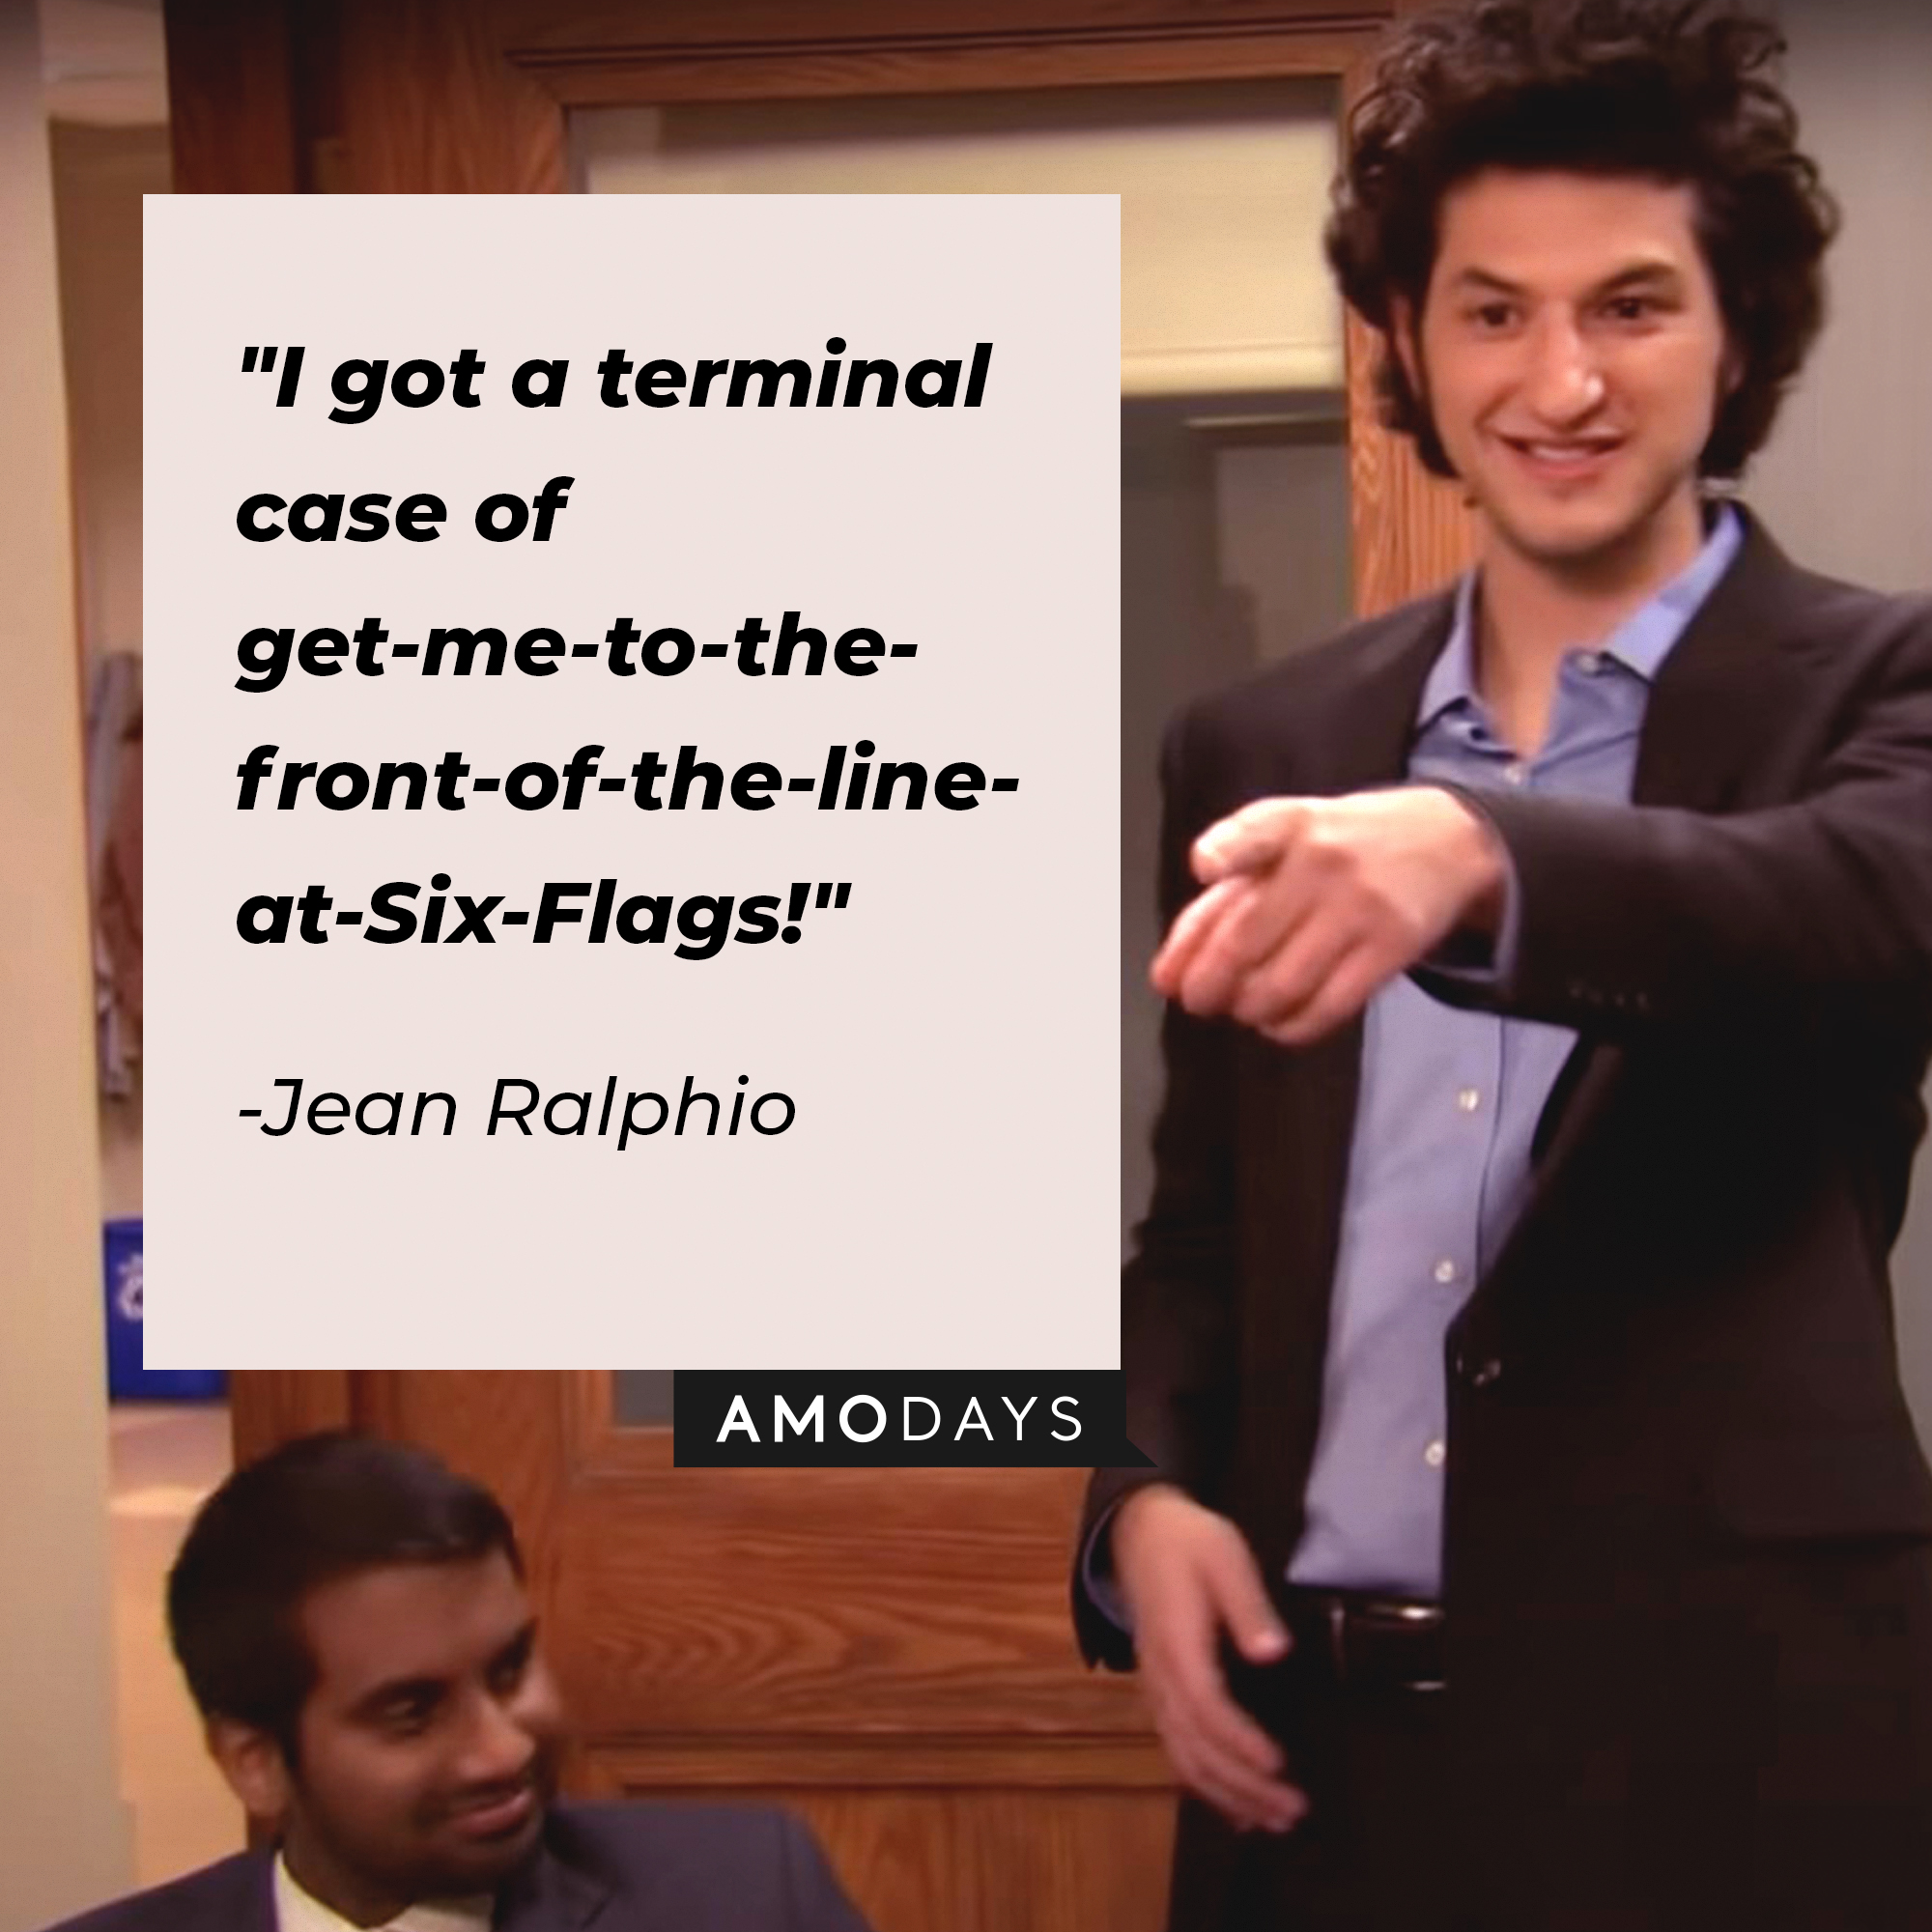 Jean Ralphio's quote: "I got a terminal case of get-me-to-the-front-of-the-line-at-Six-Flags!" | Source: Facebook.com/parksandrecreation